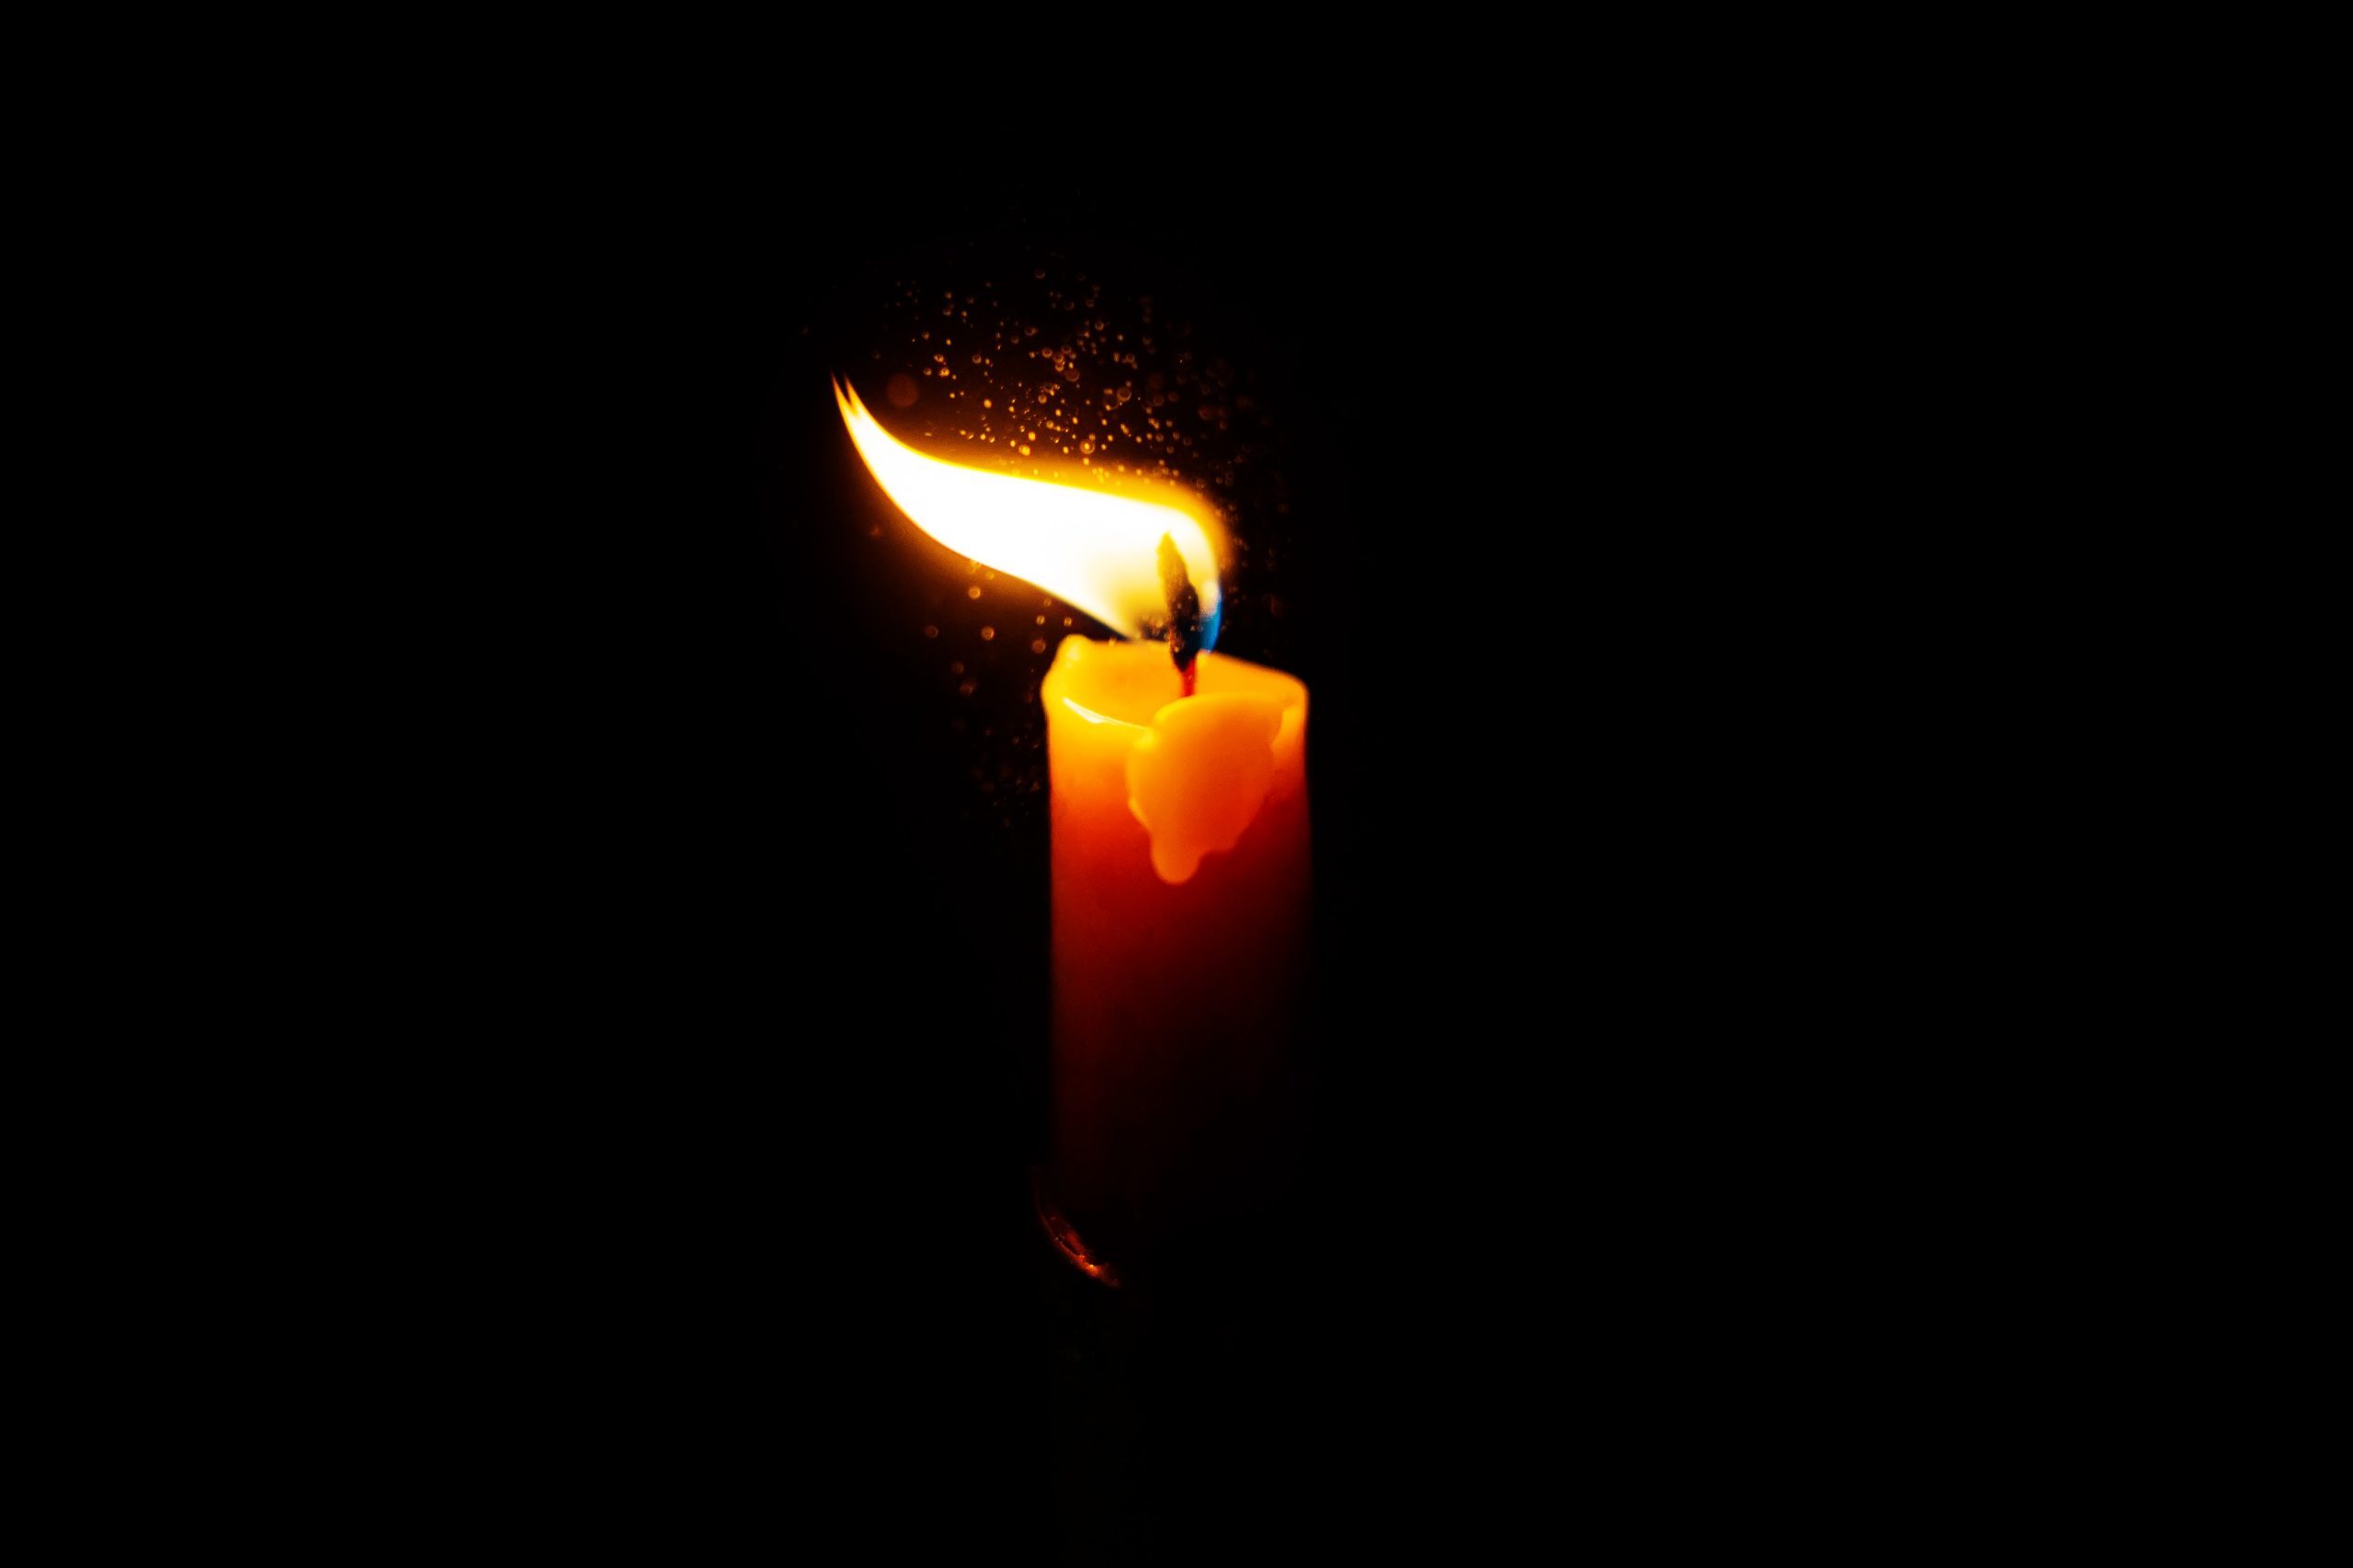 A bright candle burns in the darkness, sparks flying. A candle in memory of the deceased. Sadness and sorrow.